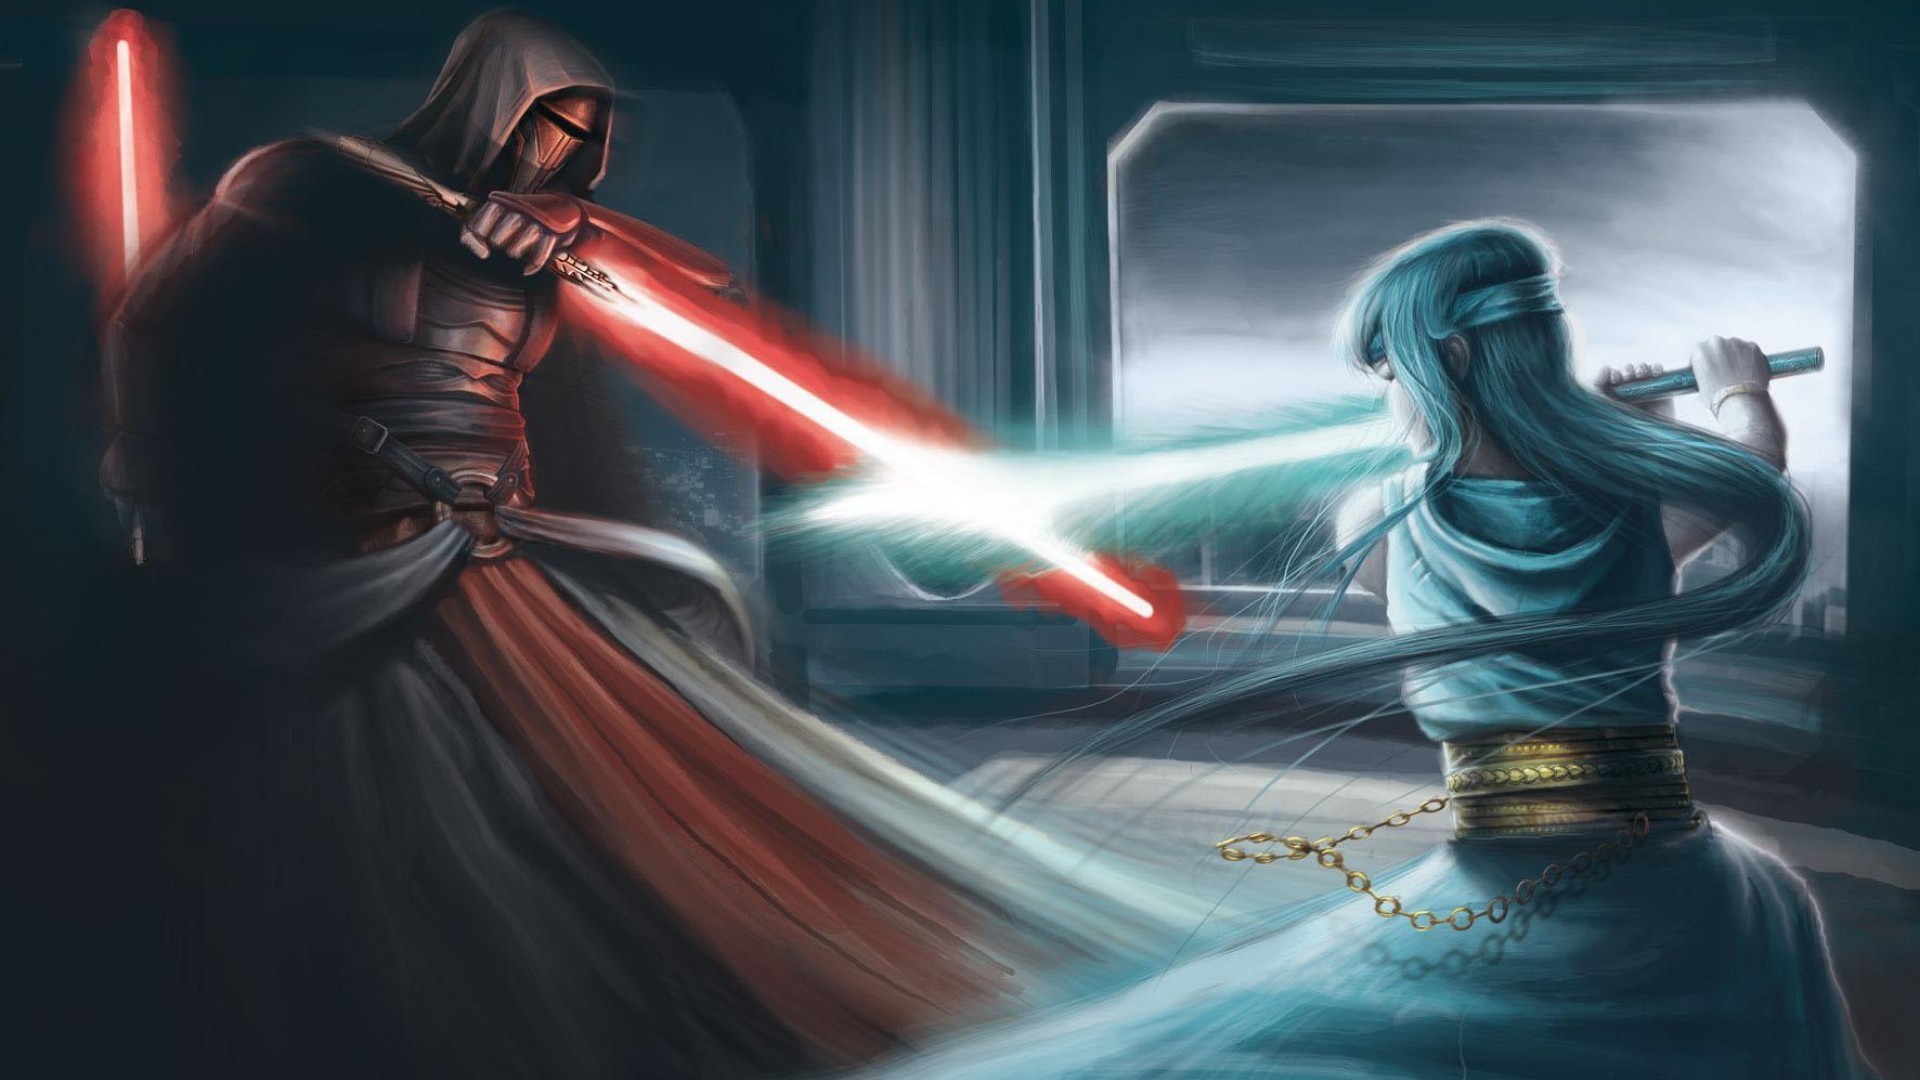 darth-revan-star-wars-lightsaber-fighting-star-wars-knights-of-the-old-republic-wallpapers